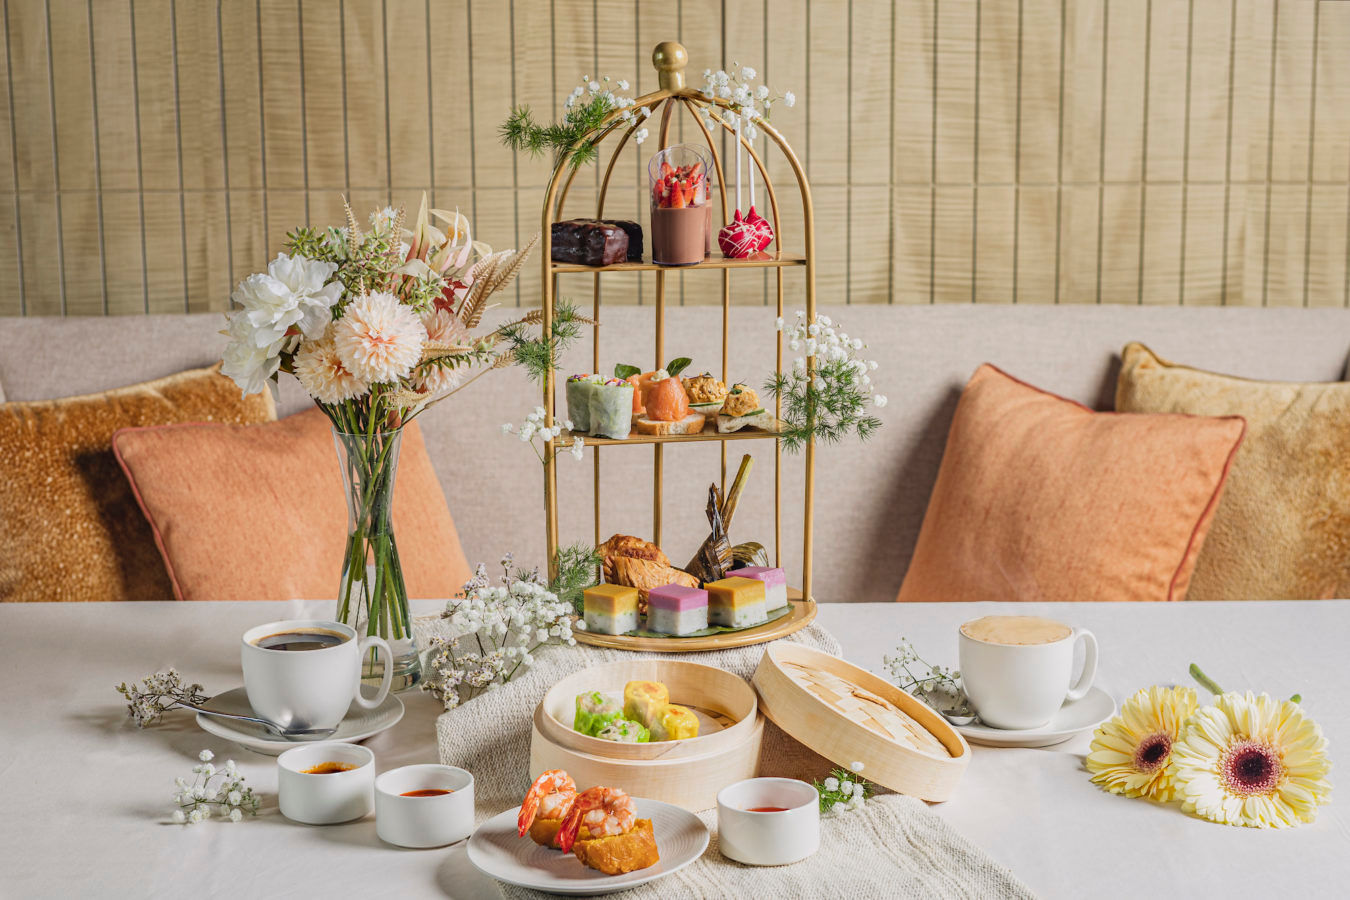 The best afternoon tea experiences in KL for June/July 2022